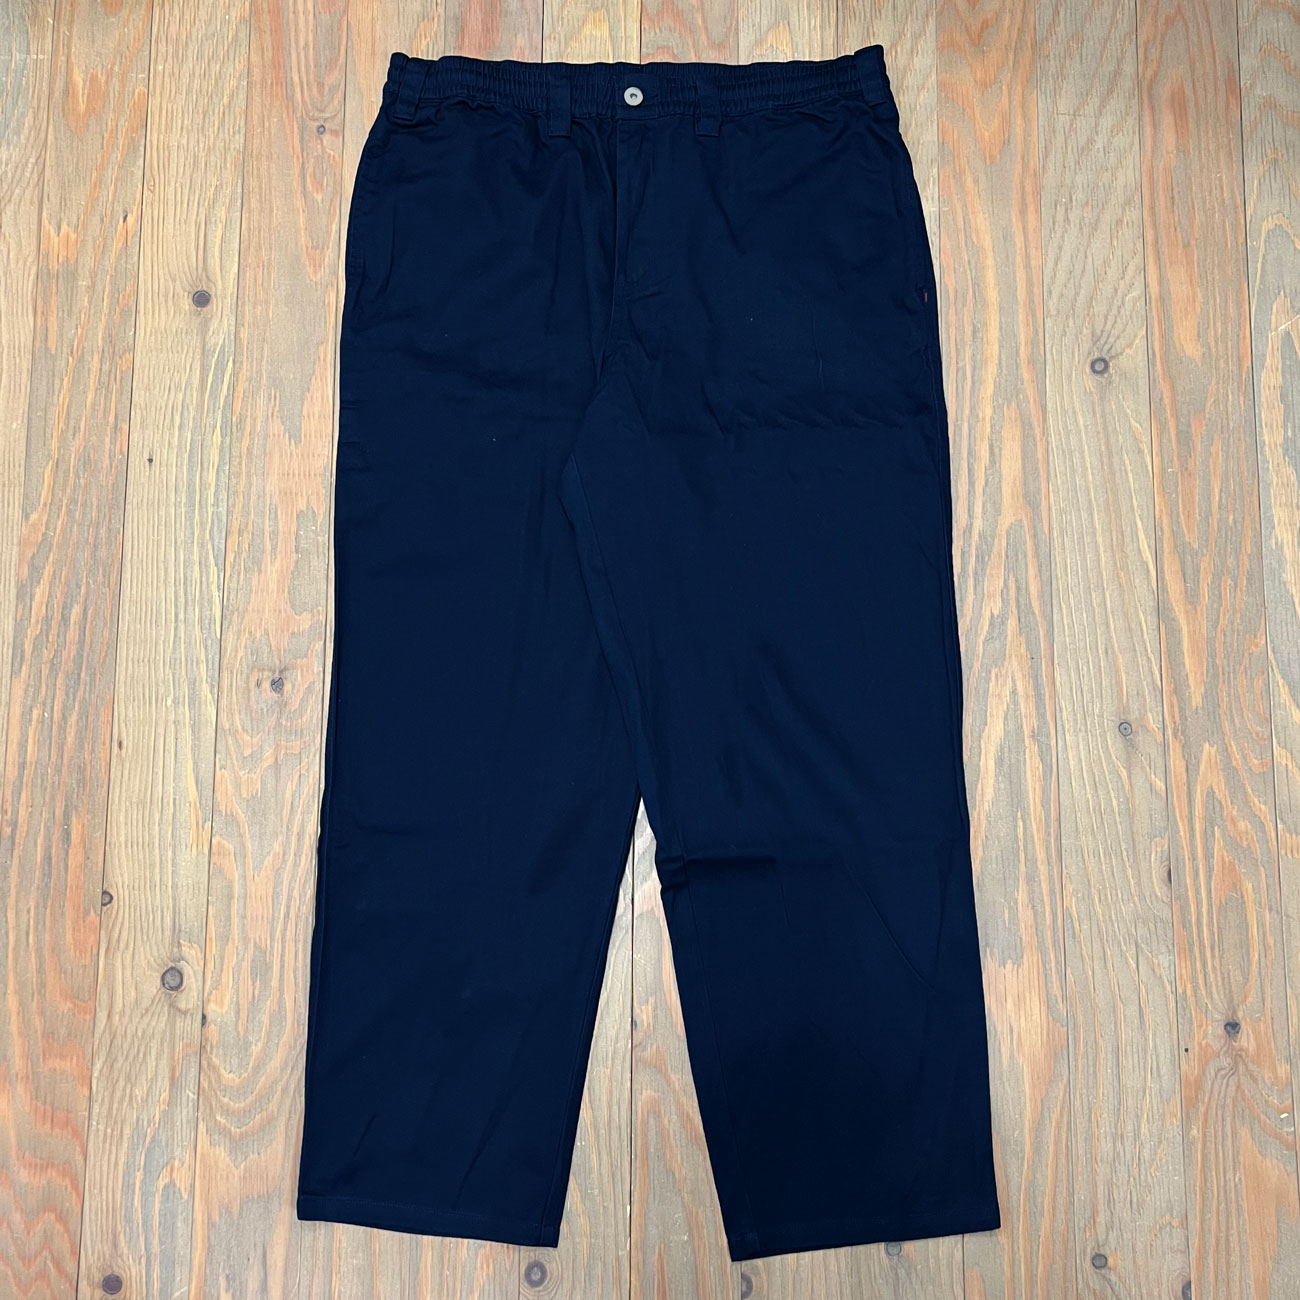 THEORIES STAMP LOUNGE PANTS NAVY